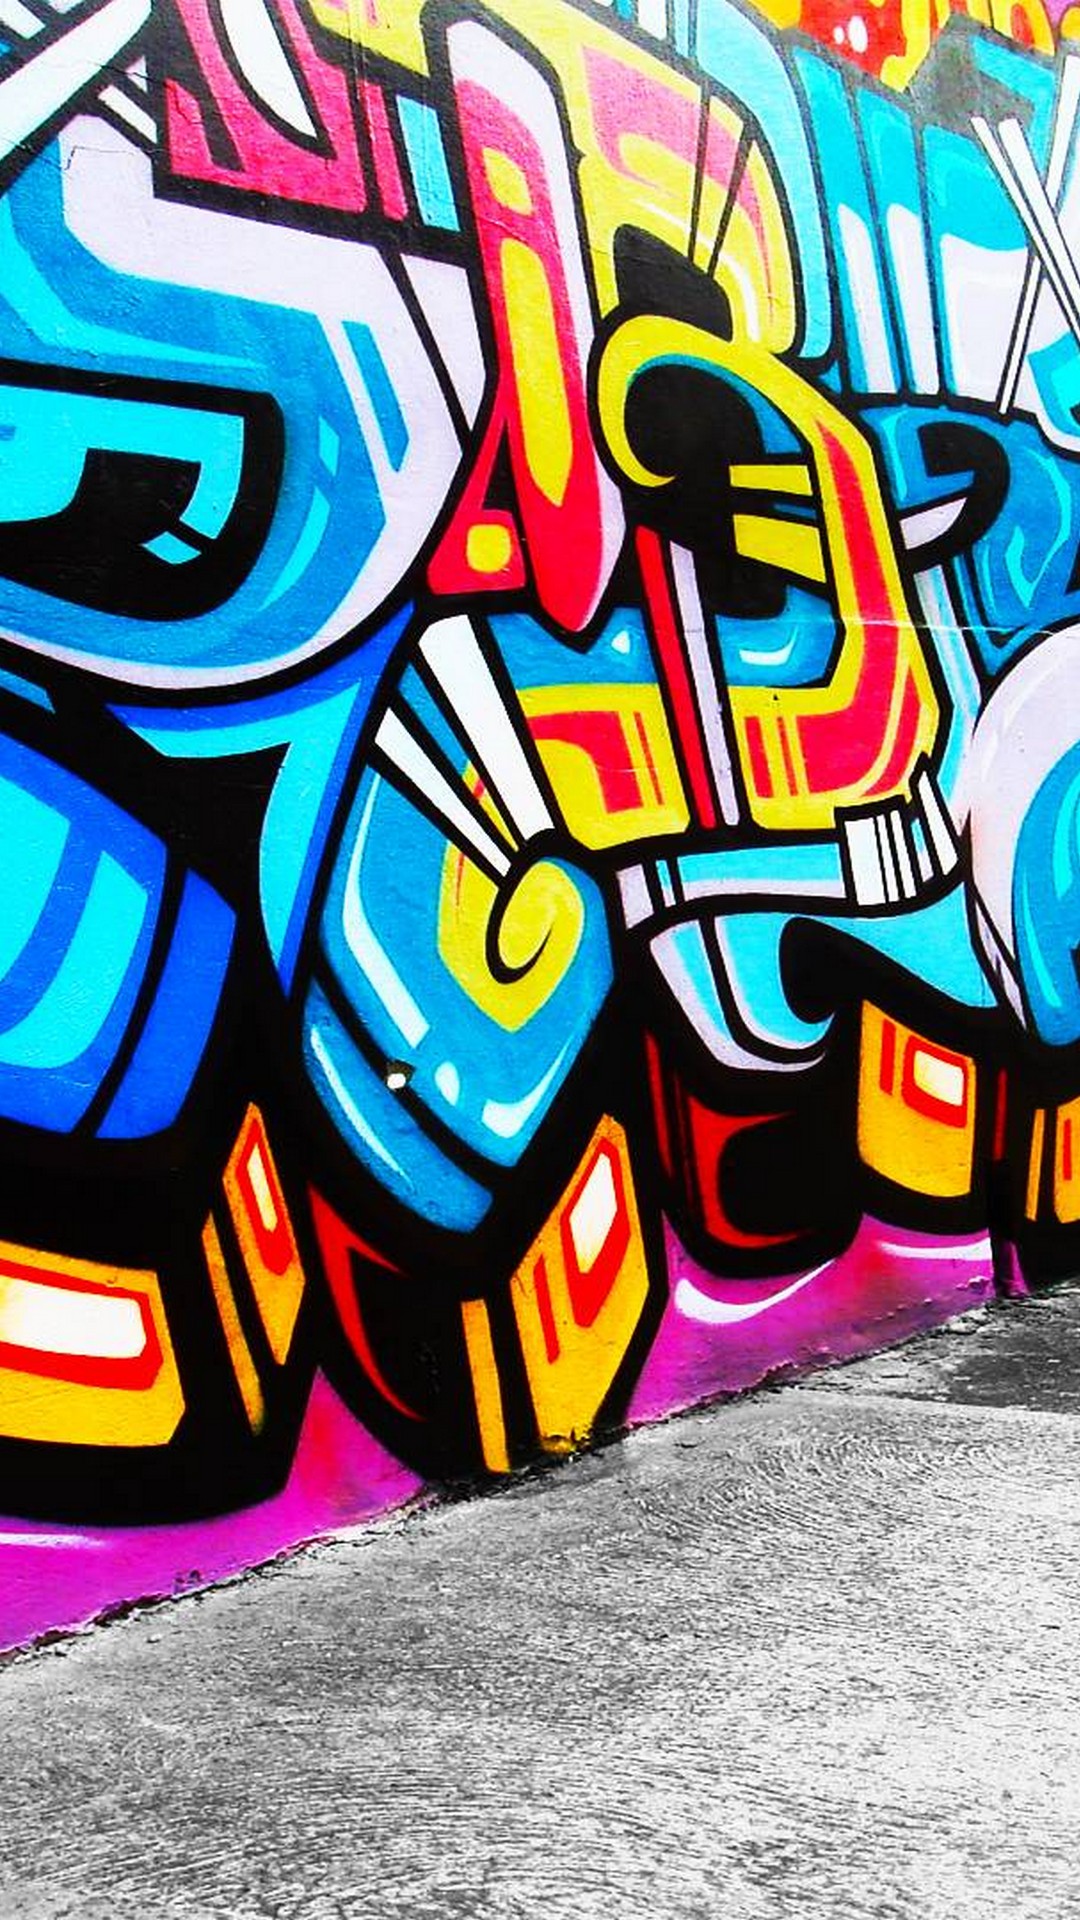 Graffiti Mobile Wallpaper HD With Resolution 1080X1920 pixel. You can make this wallpaper for your Desktop Computer Backgrounds, Mac Wallpapers, Android Lock screen or iPhone Screensavers